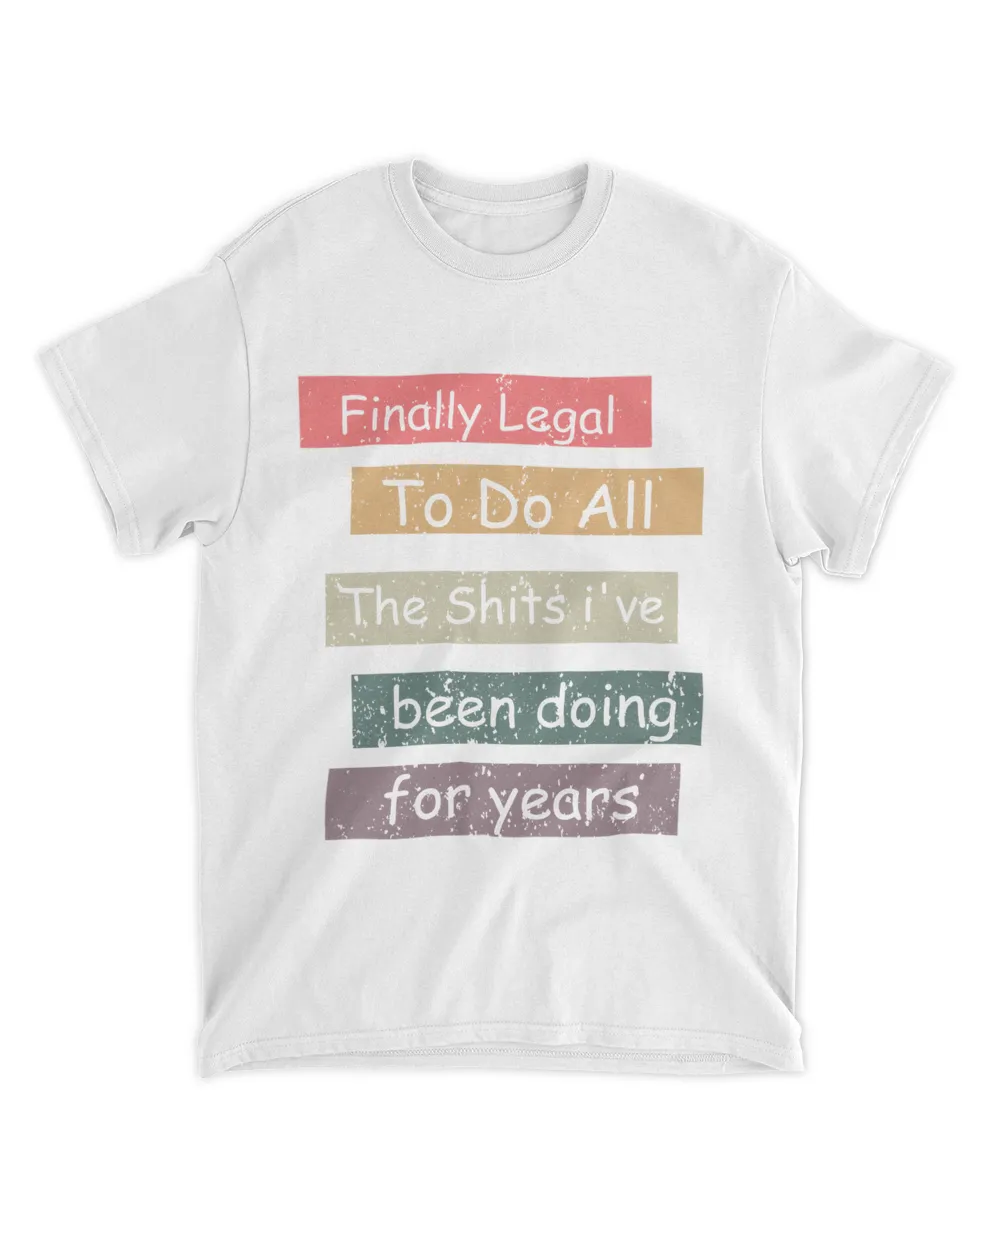 Finally Legal To Do All The Shits I've Been Doing For Year Shirt